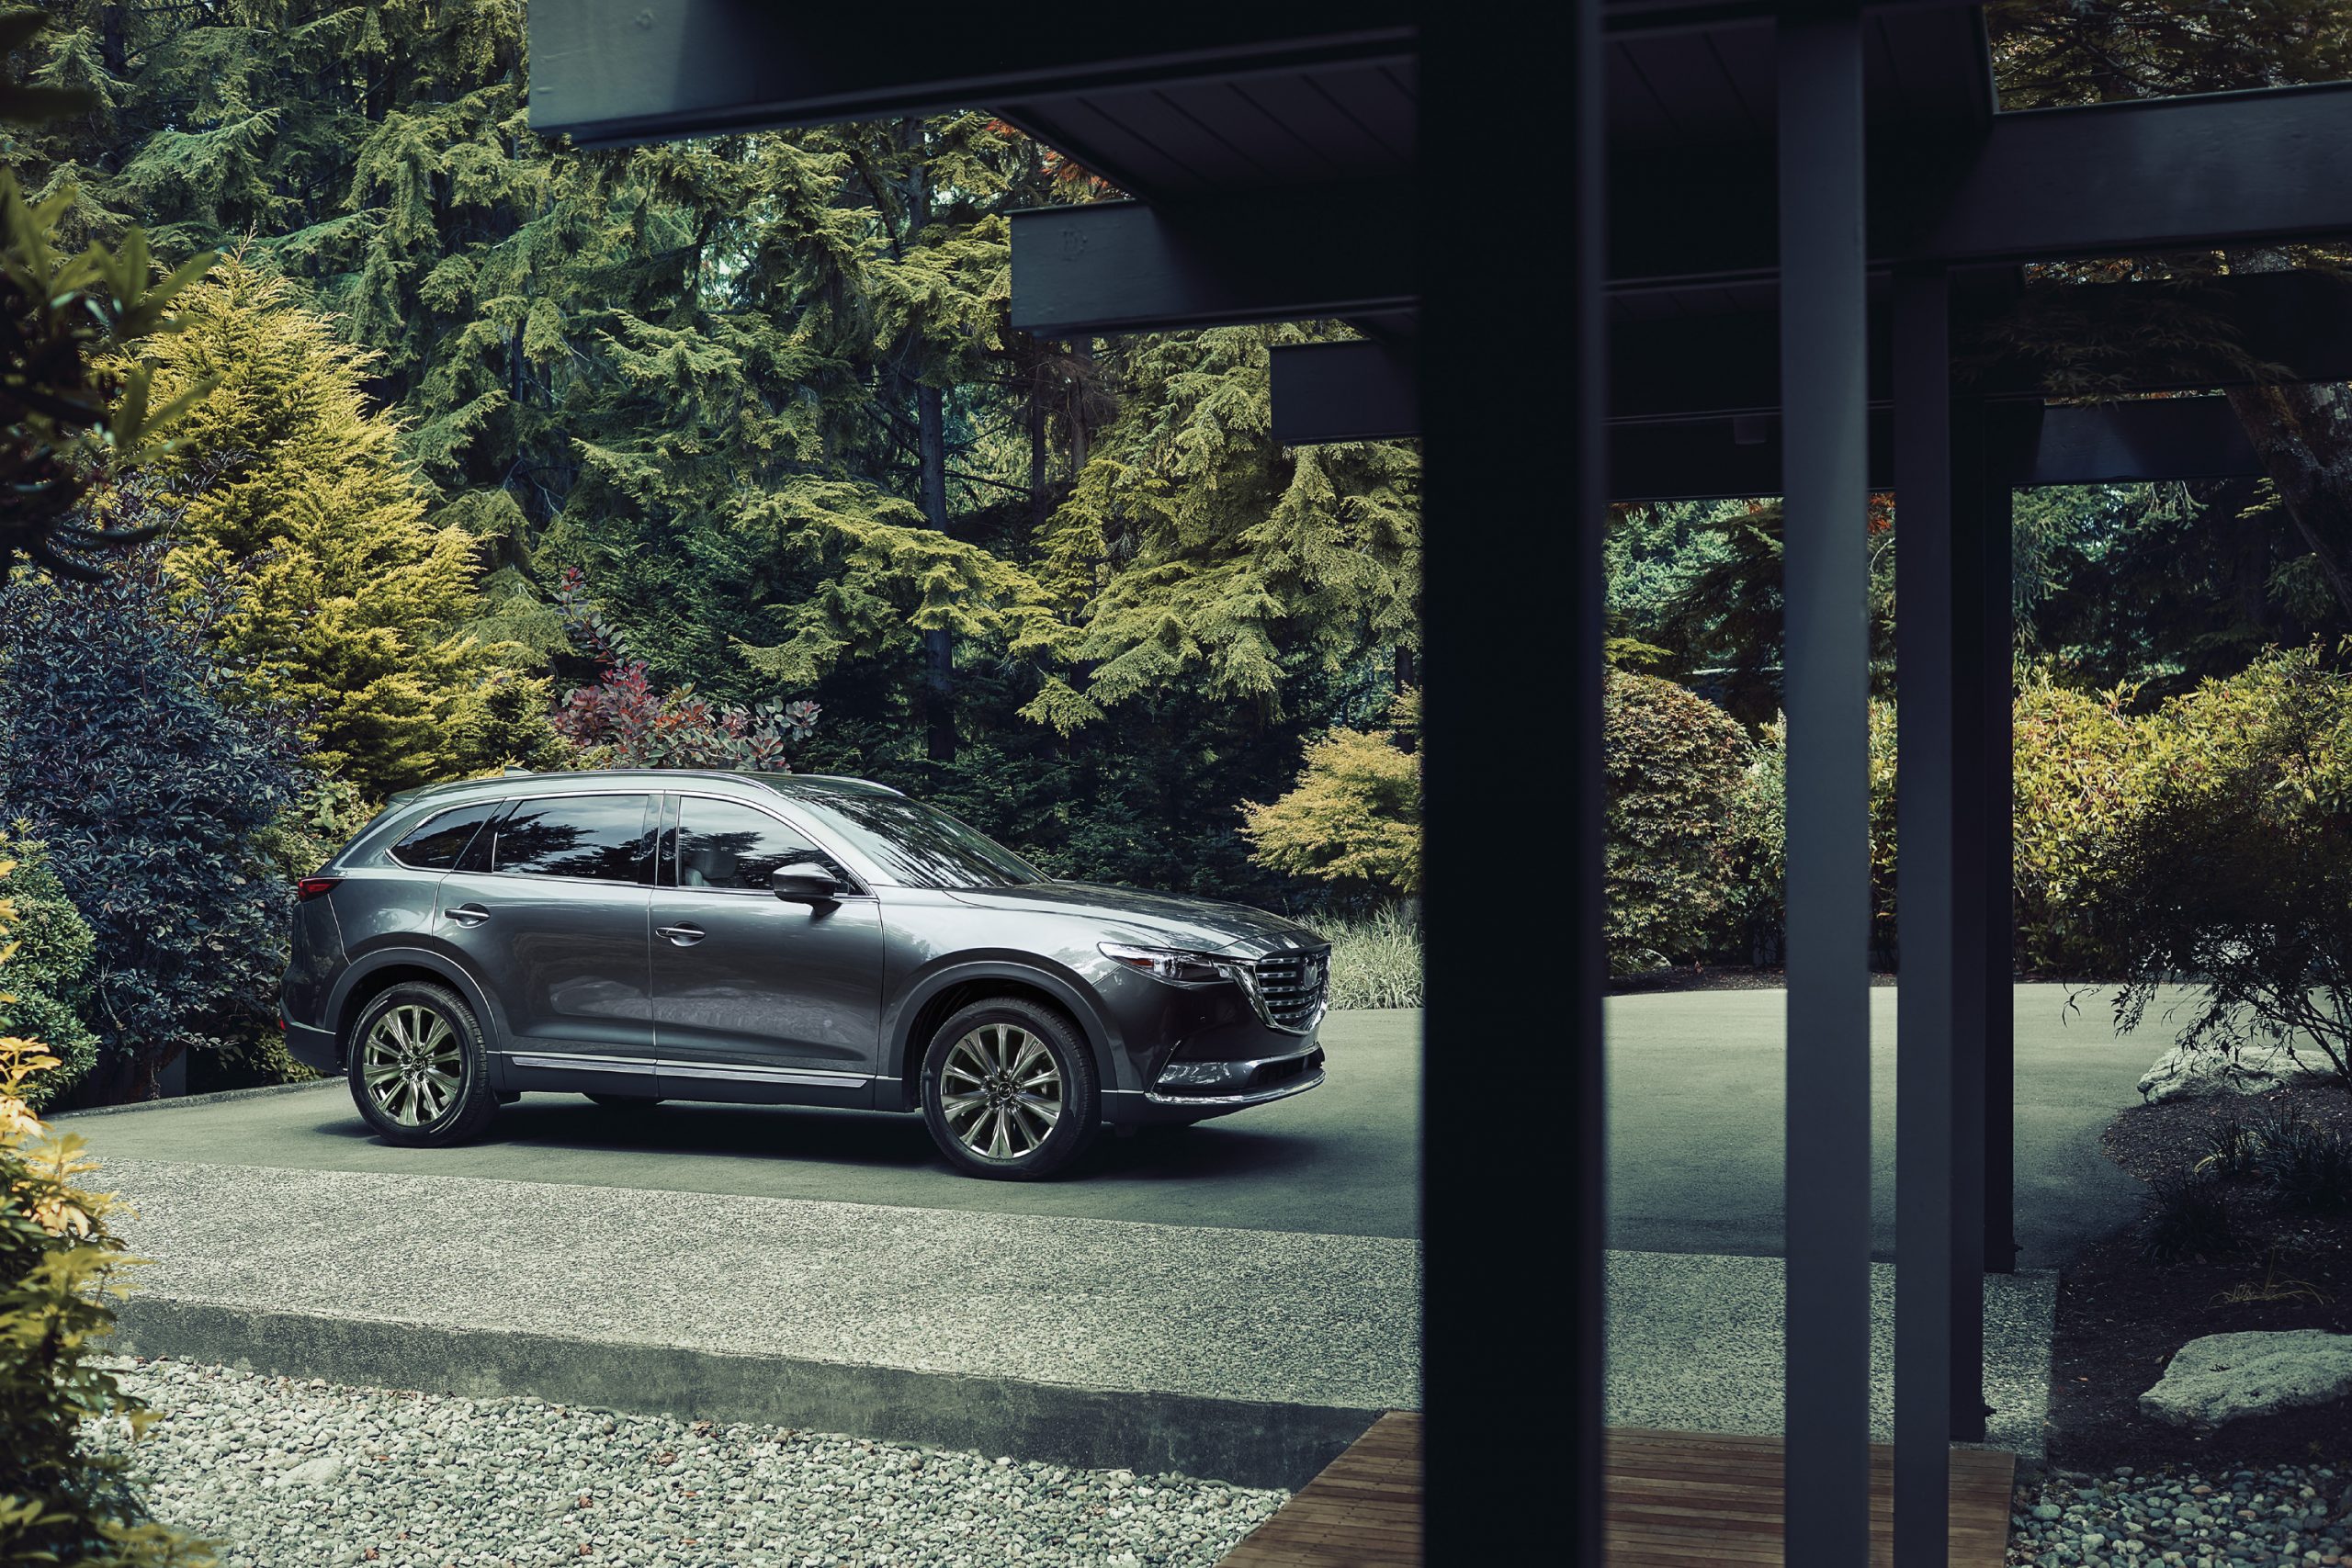 A silver 2021 Mazda CX-9 parked in a driveway with trees in the background